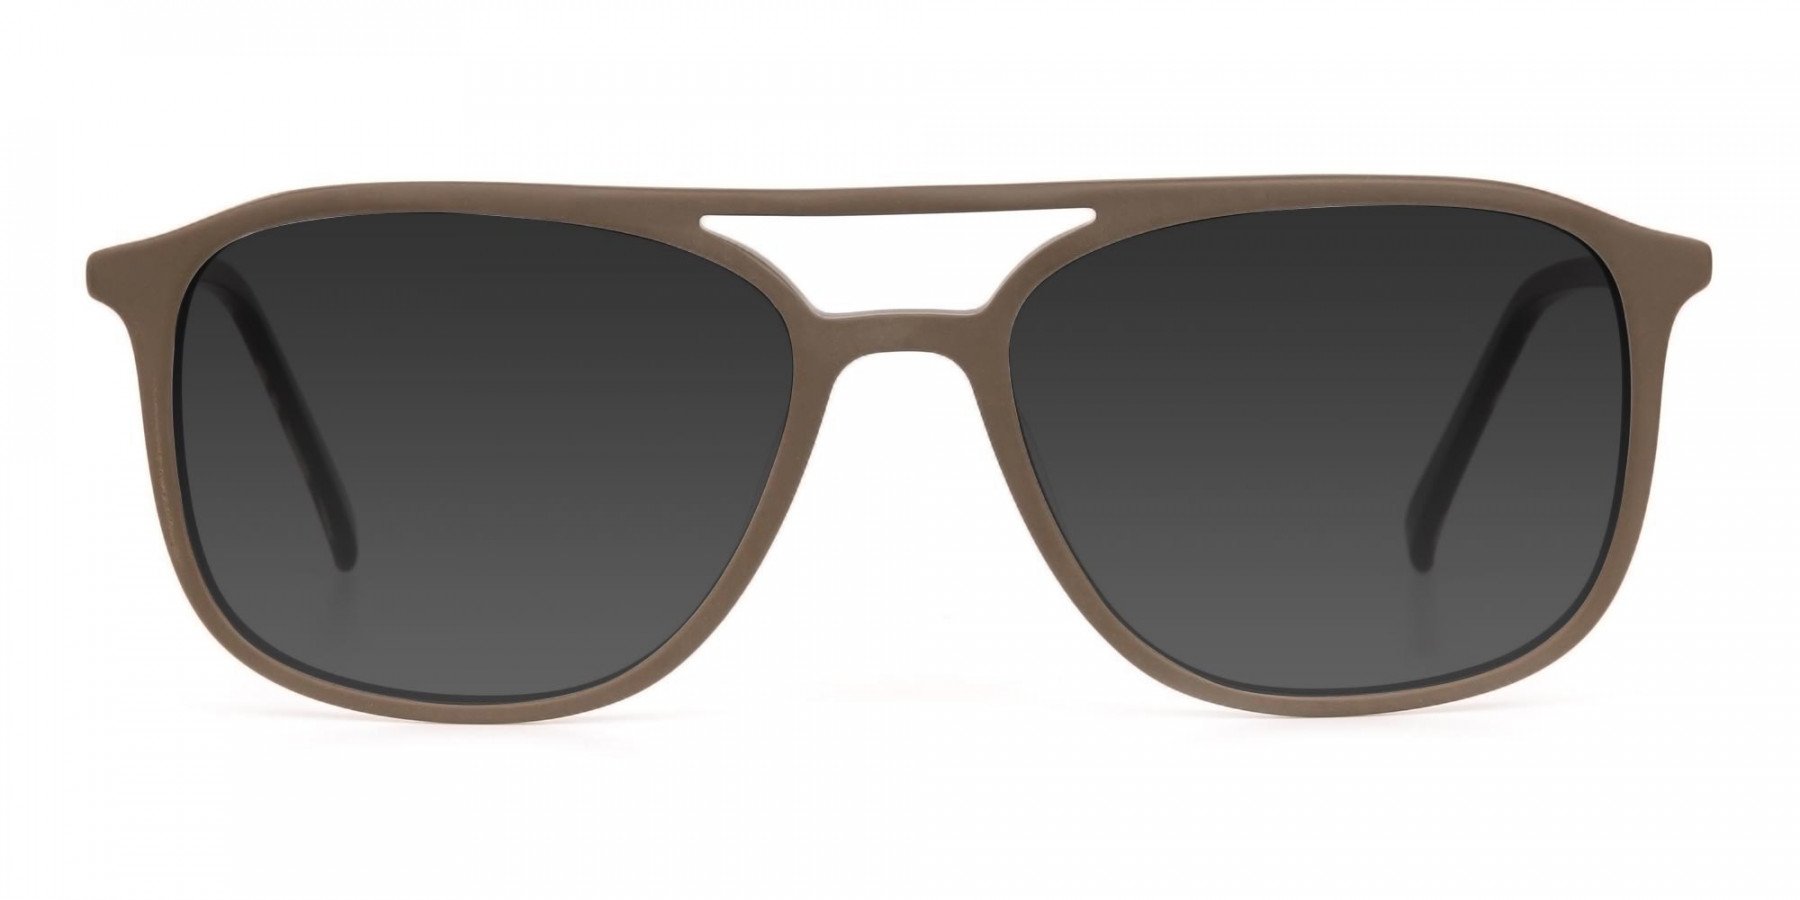 Brown Frame Sunglasses with Dark Grey Tint - 3